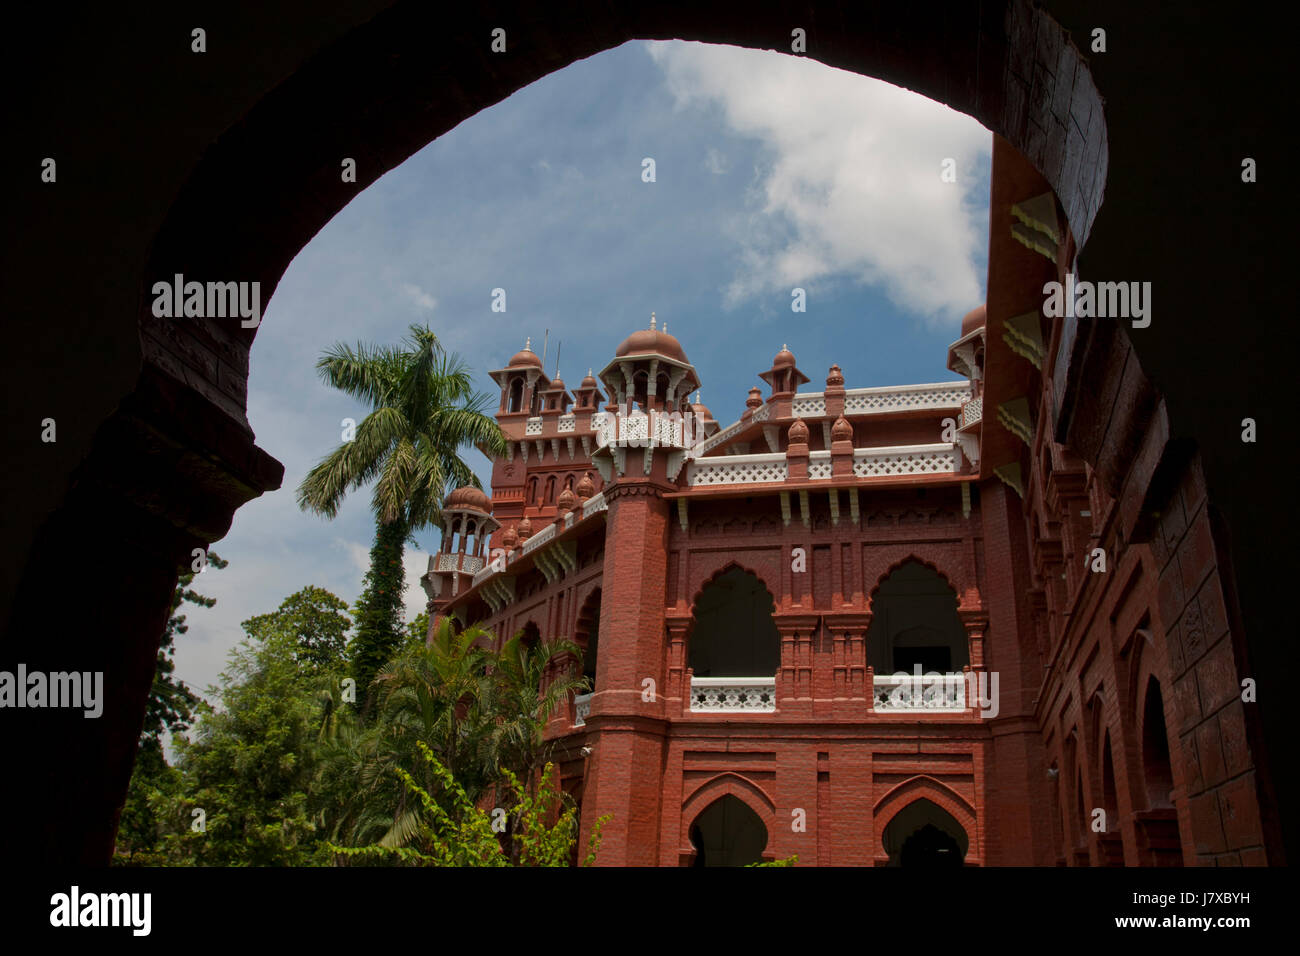 Curzon Hall of Dhaka University. It was built to be a town hall, and named after Lord Curzon, the Viceroy of India, who laid its foundation in 1904. A Stock Photo